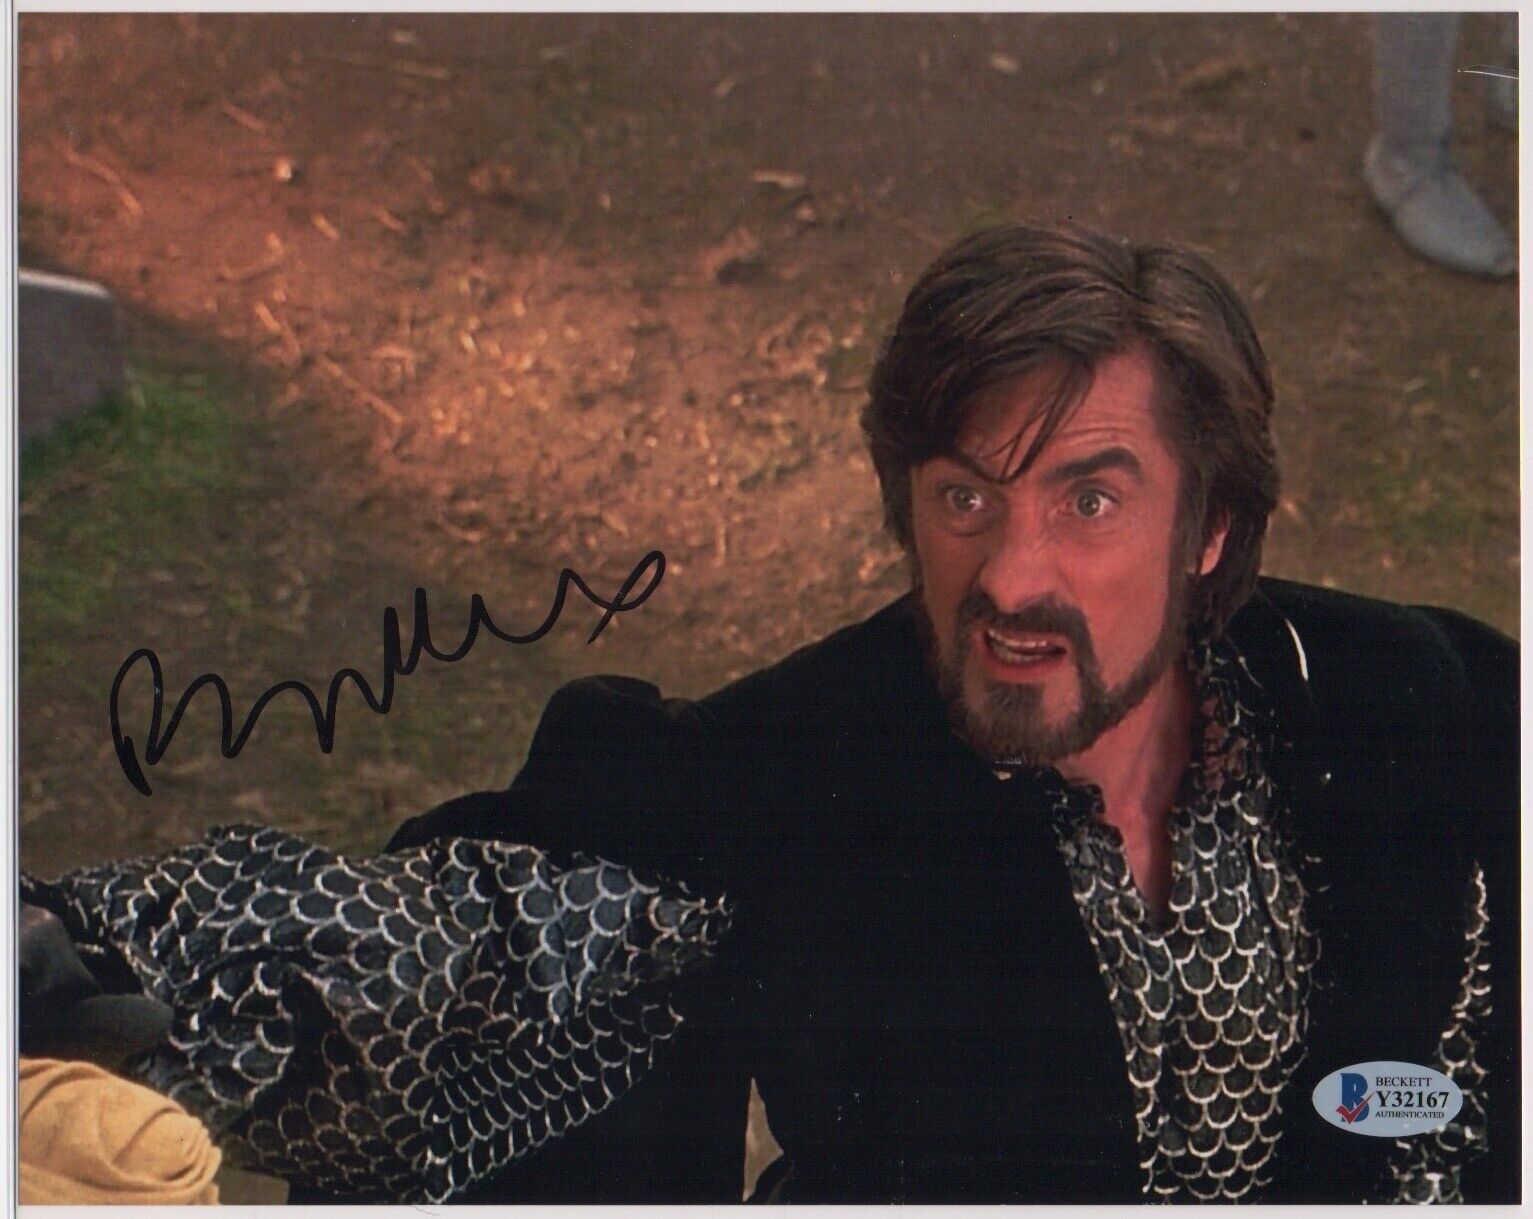 ROGER REES signed MEN IN TIGHTS 8x10 Photo Poster painting AUTOGRAPH auto BAS Beckett Brooks